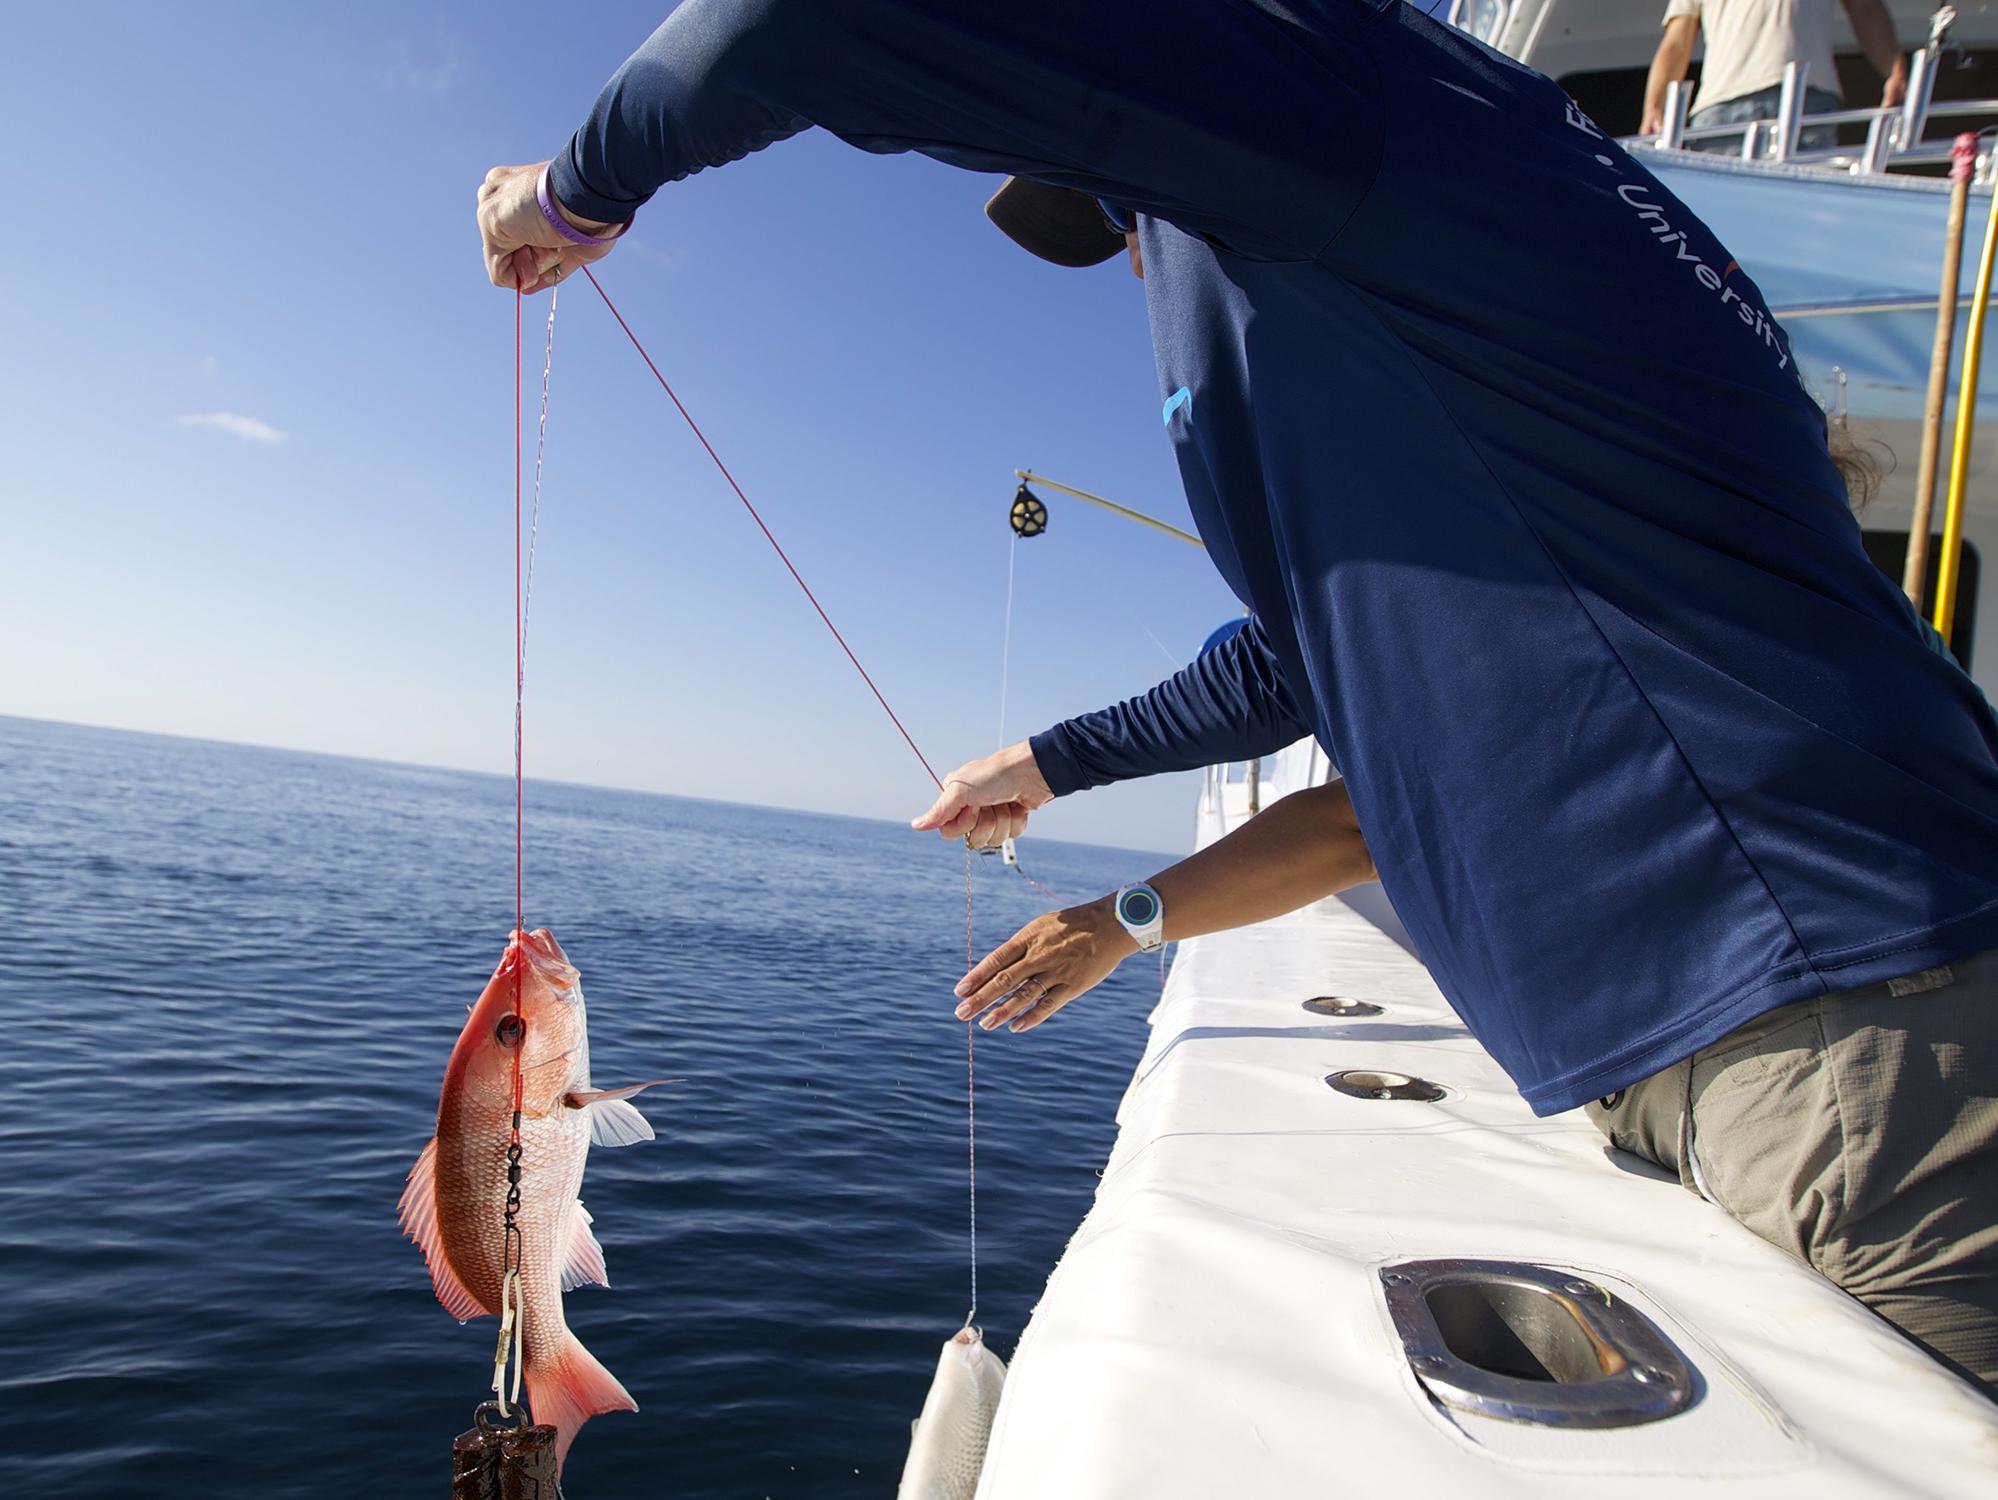 A man in a boat holds a red snapper fish with a hook-and-line mechanism.